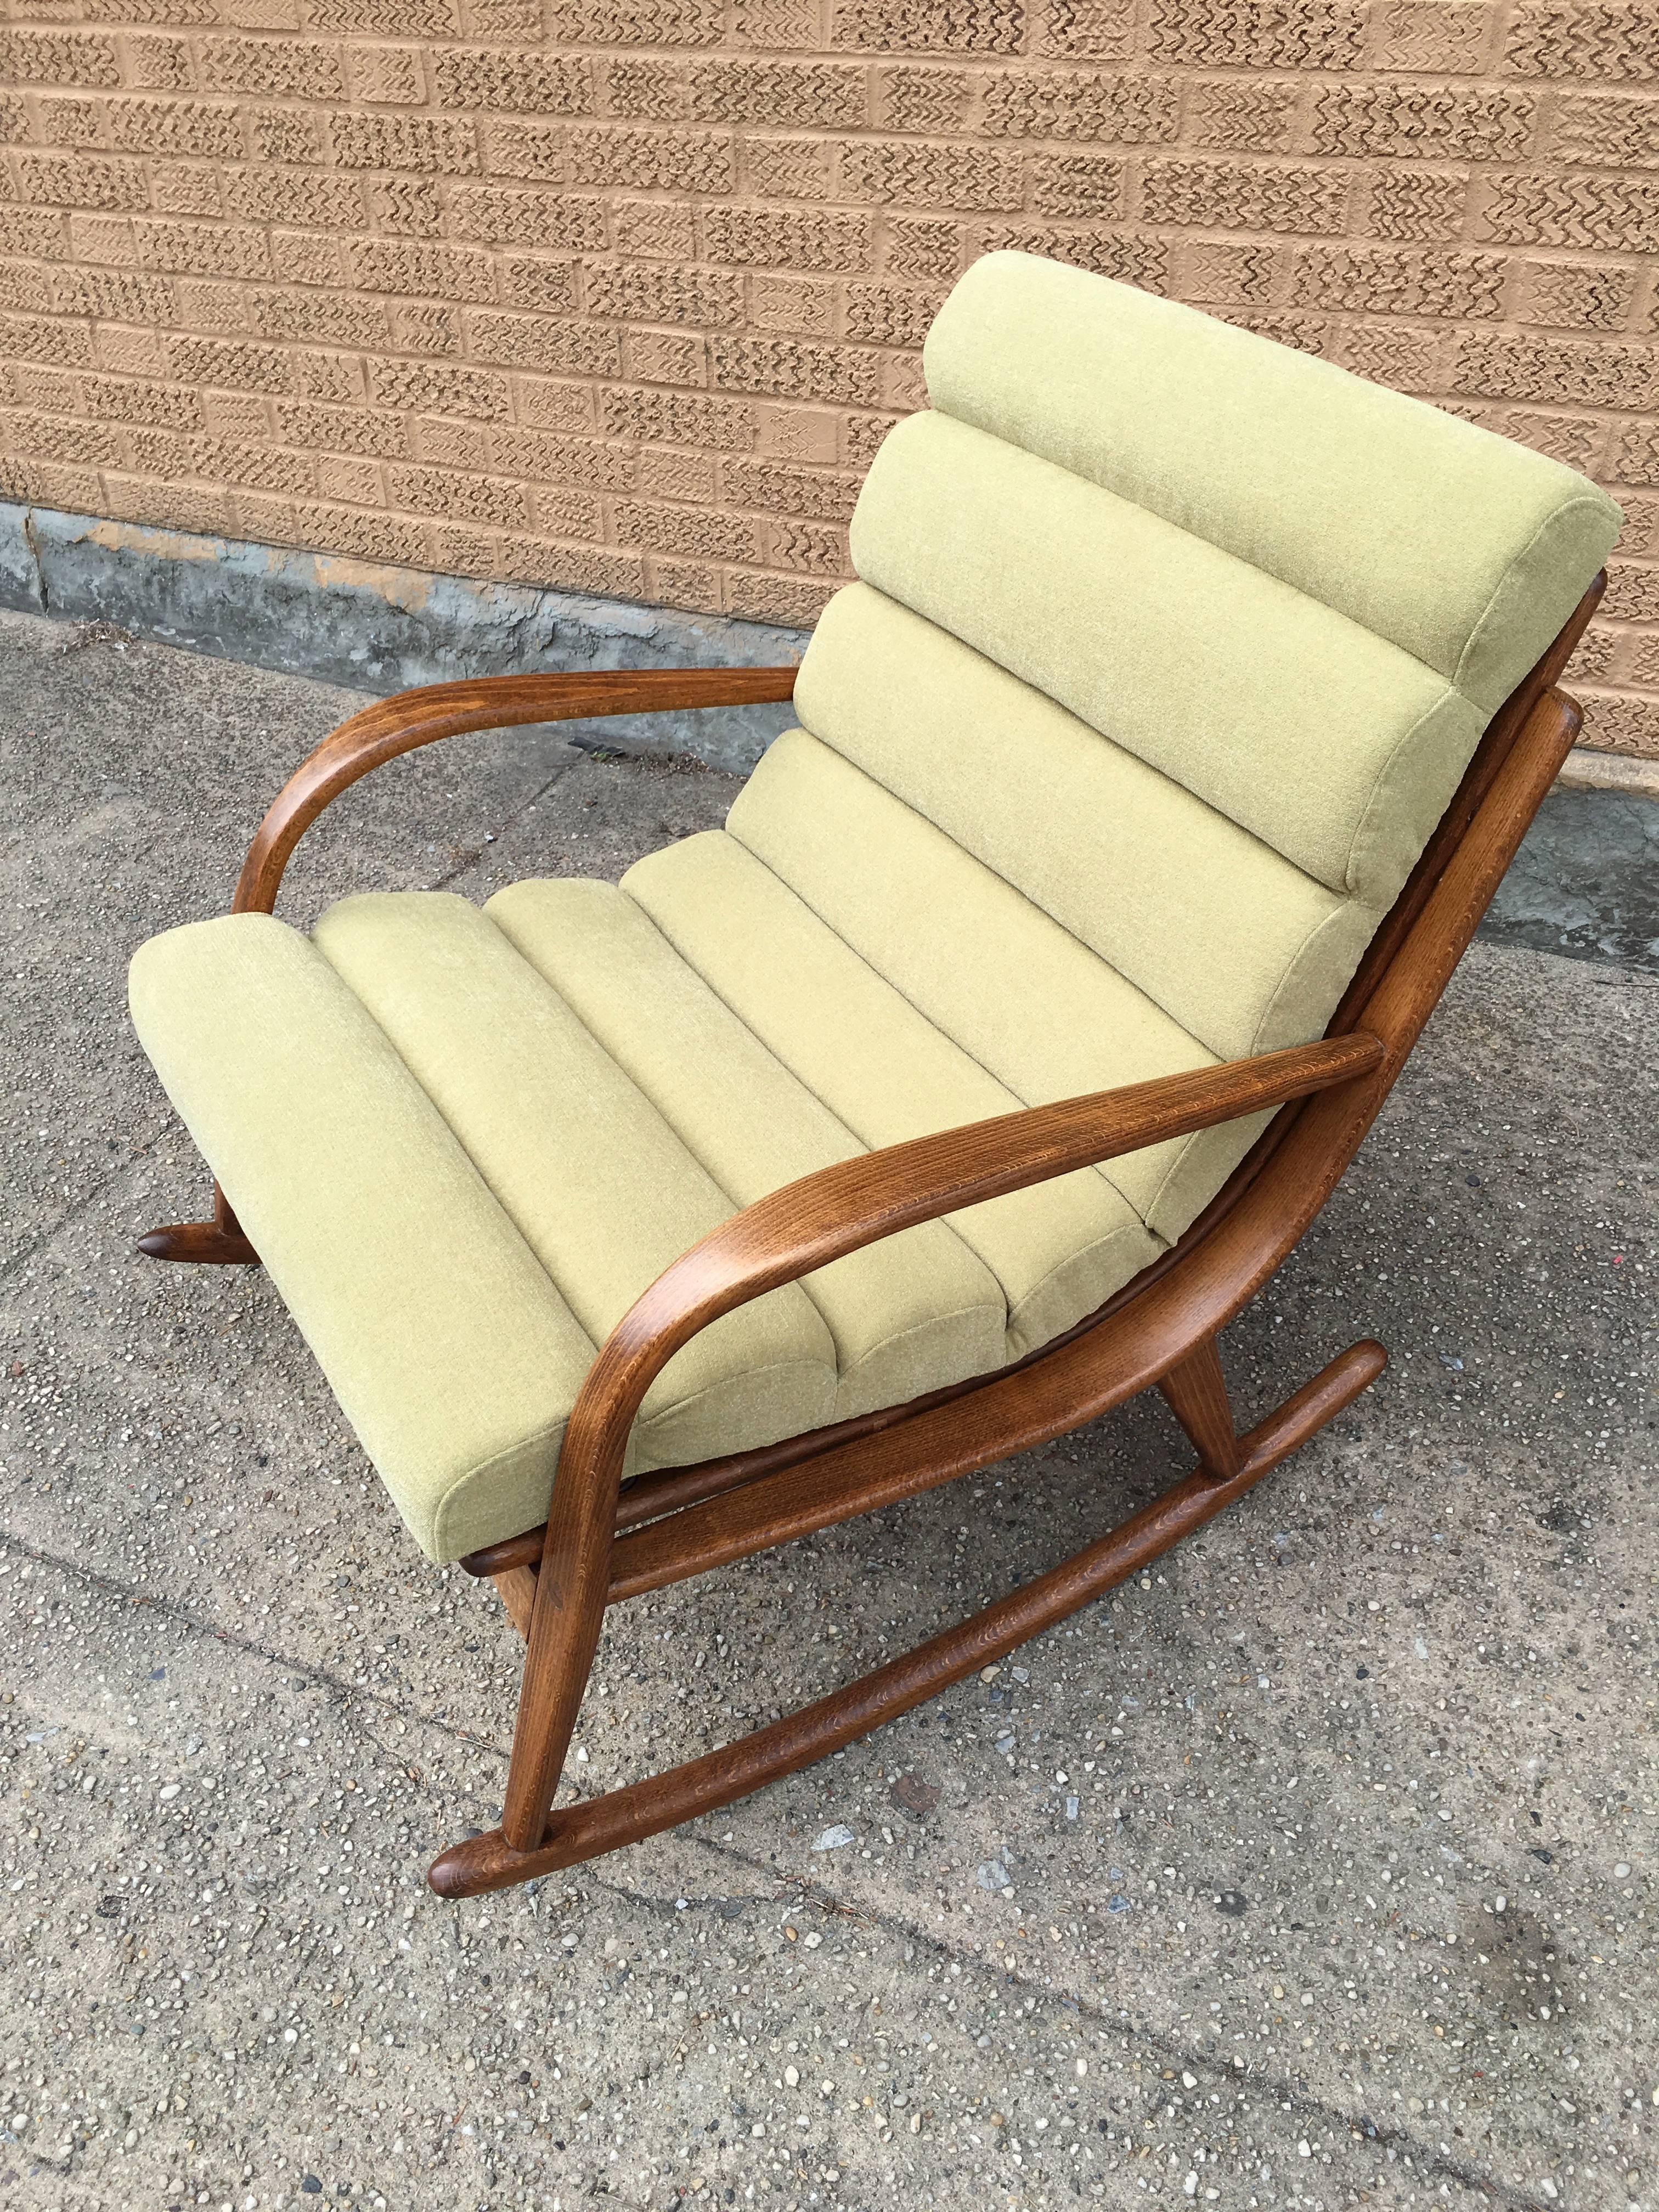 Chenille Extremely Rare Danish Modern Bentwood Upholstered Rocking Chair